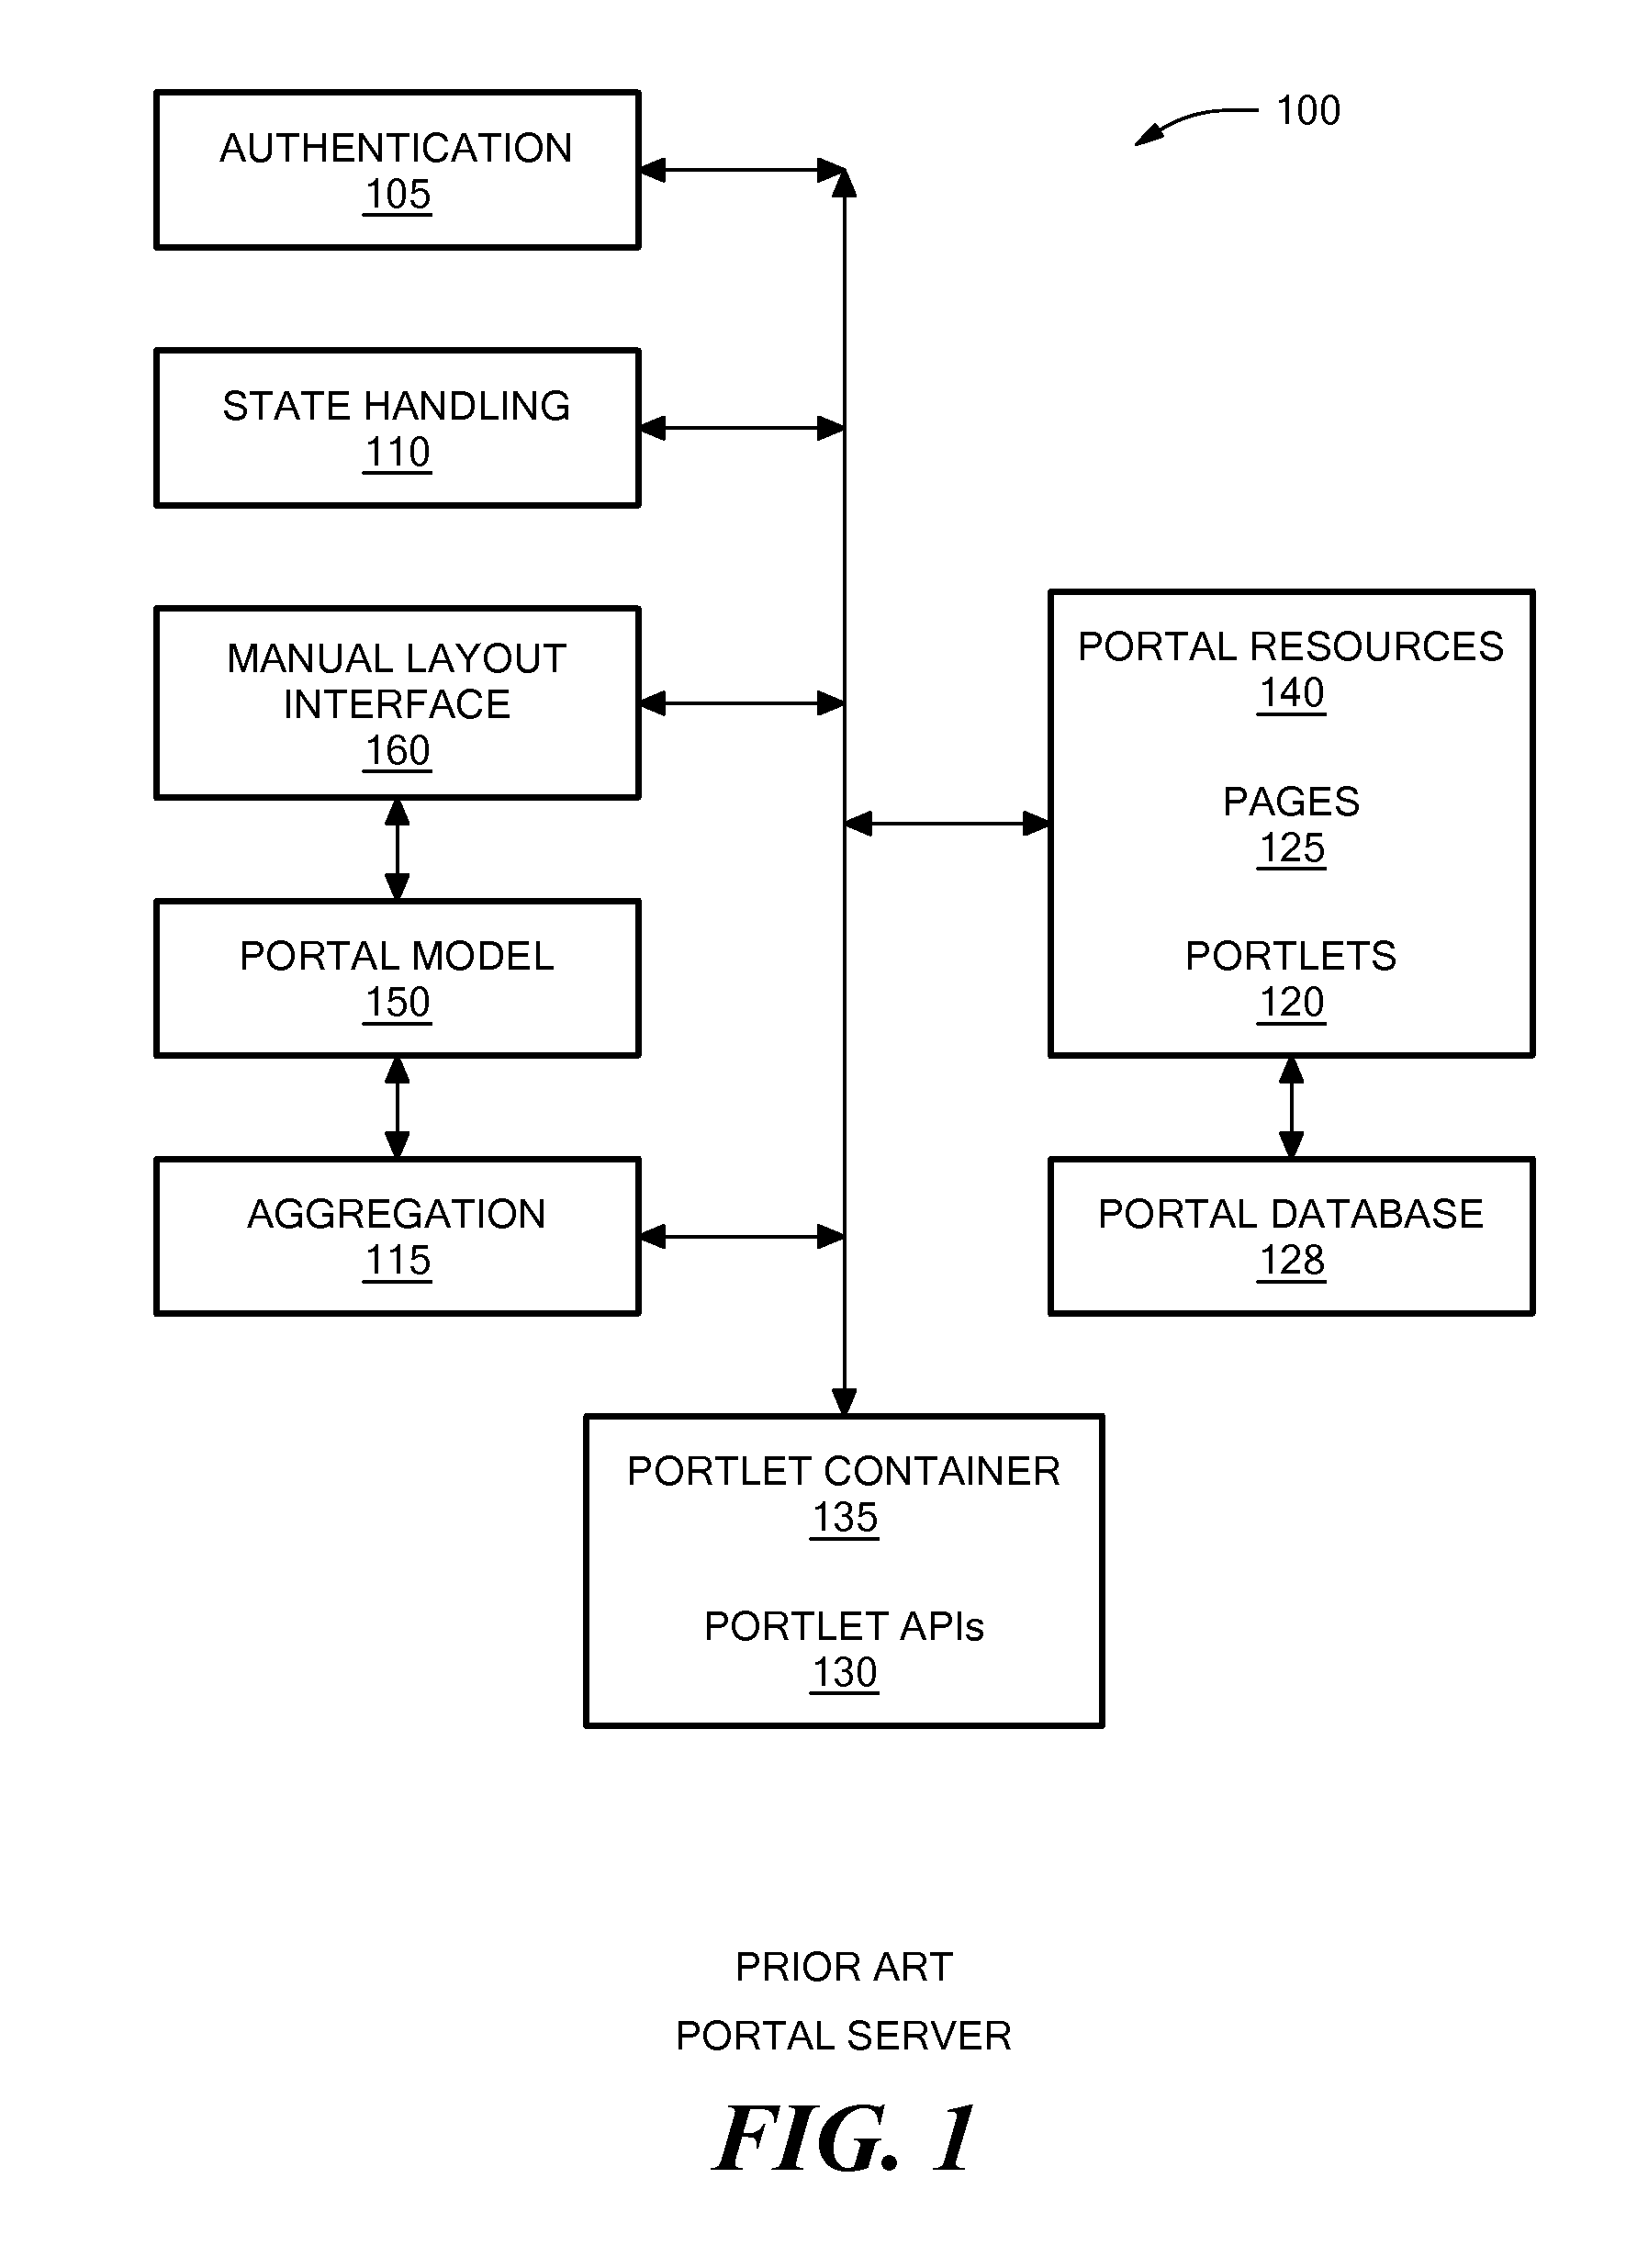 System for Automatic Arrangement of Portlets on Portal Pages According to Semantical and Functional Relationship